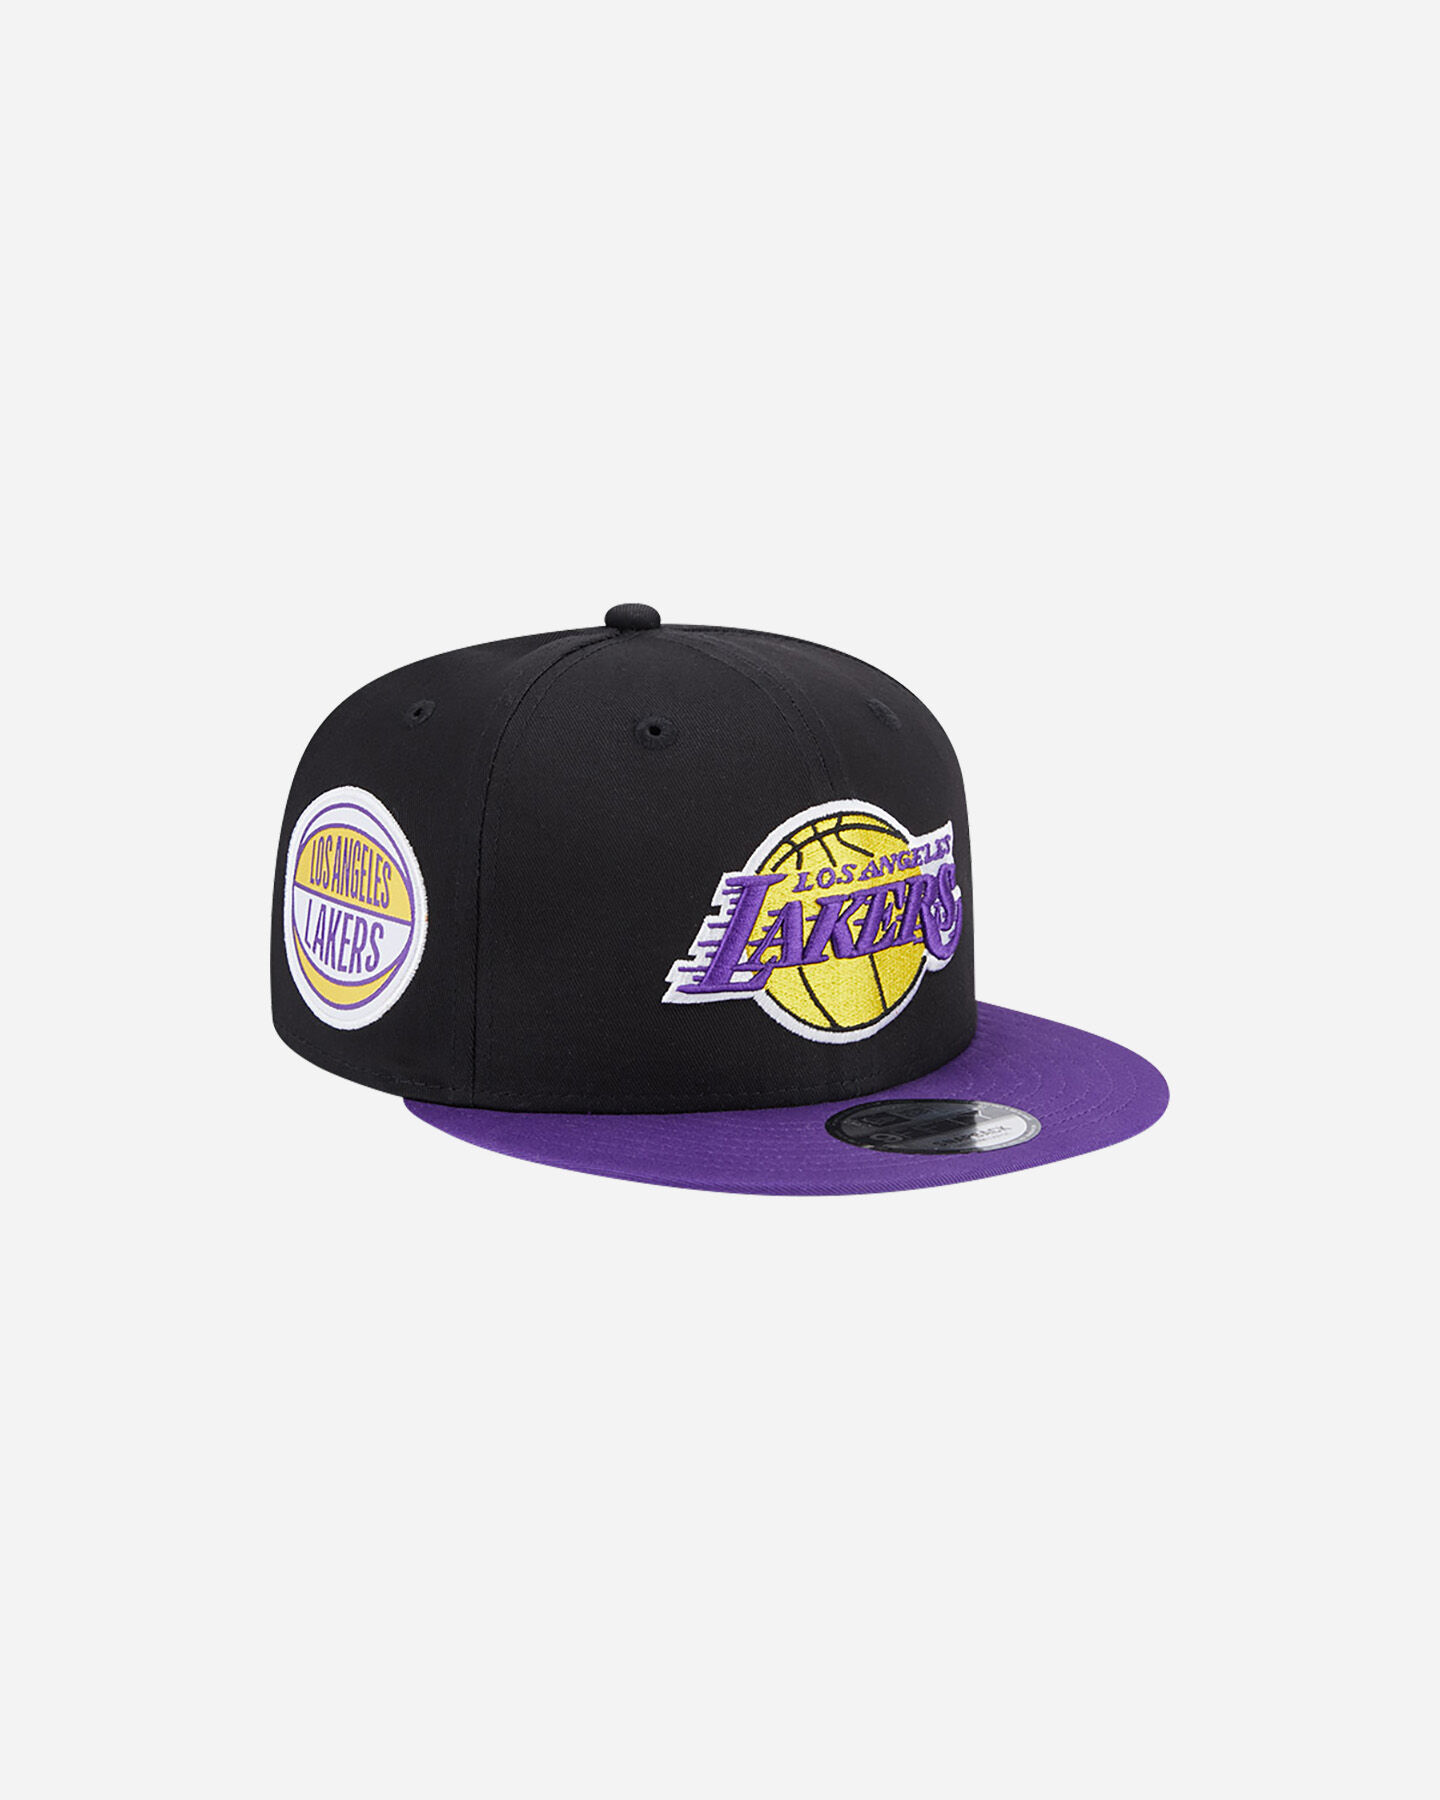  Cappellino NEW ERA 9FIFTY CONTRAST SIDE LOS ANGELES LAKERS  S5606214|001|SM scatto 2